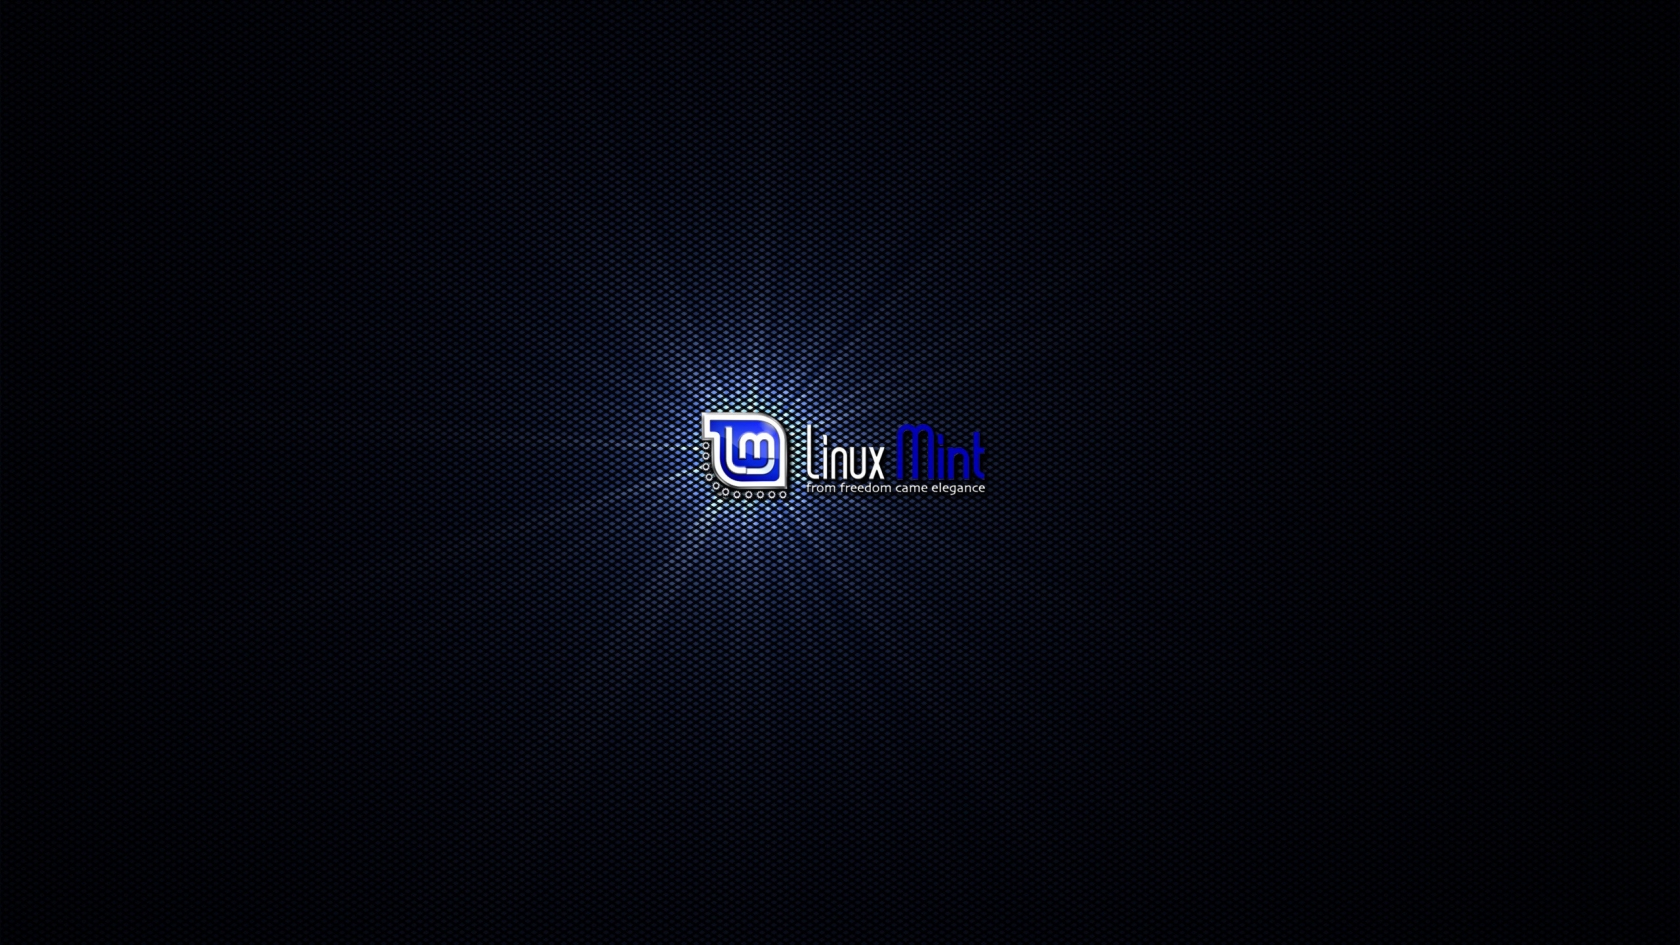 Blue mint Linux for 1680 x 945 HDTV resolution